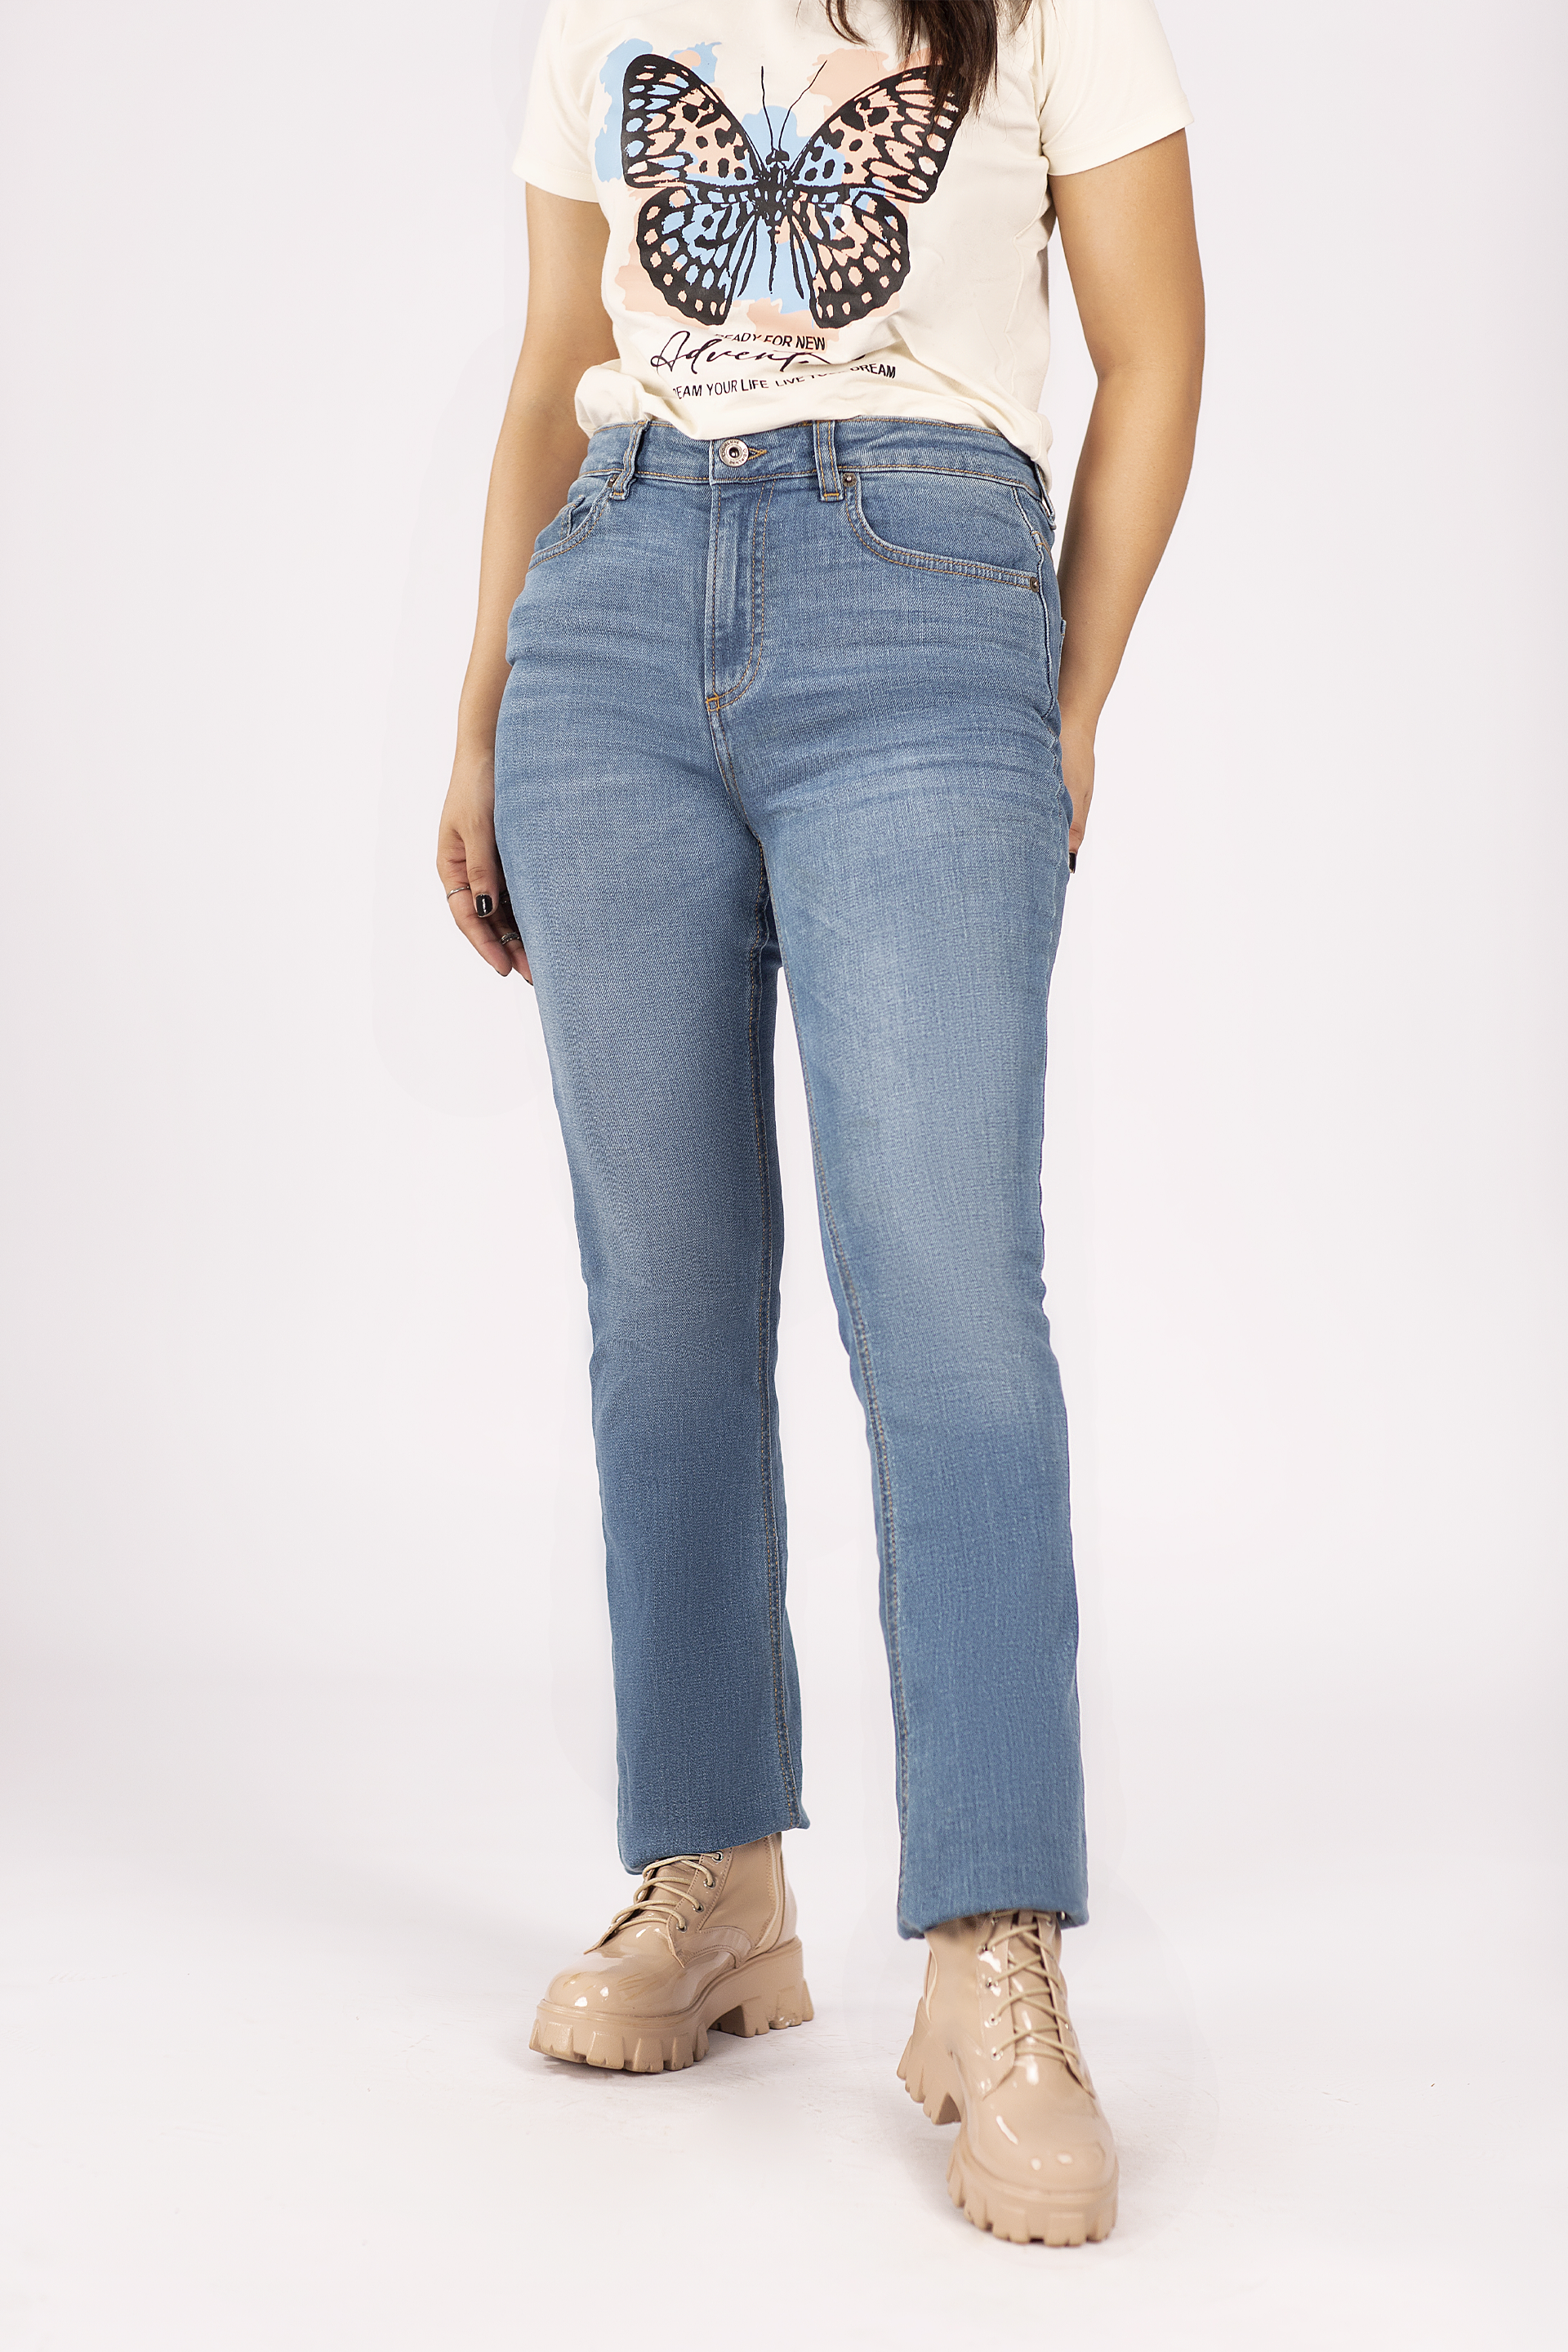 Regular Girls Jeans Pant at Rs 400/piece in Surat | ID: 2849299852055